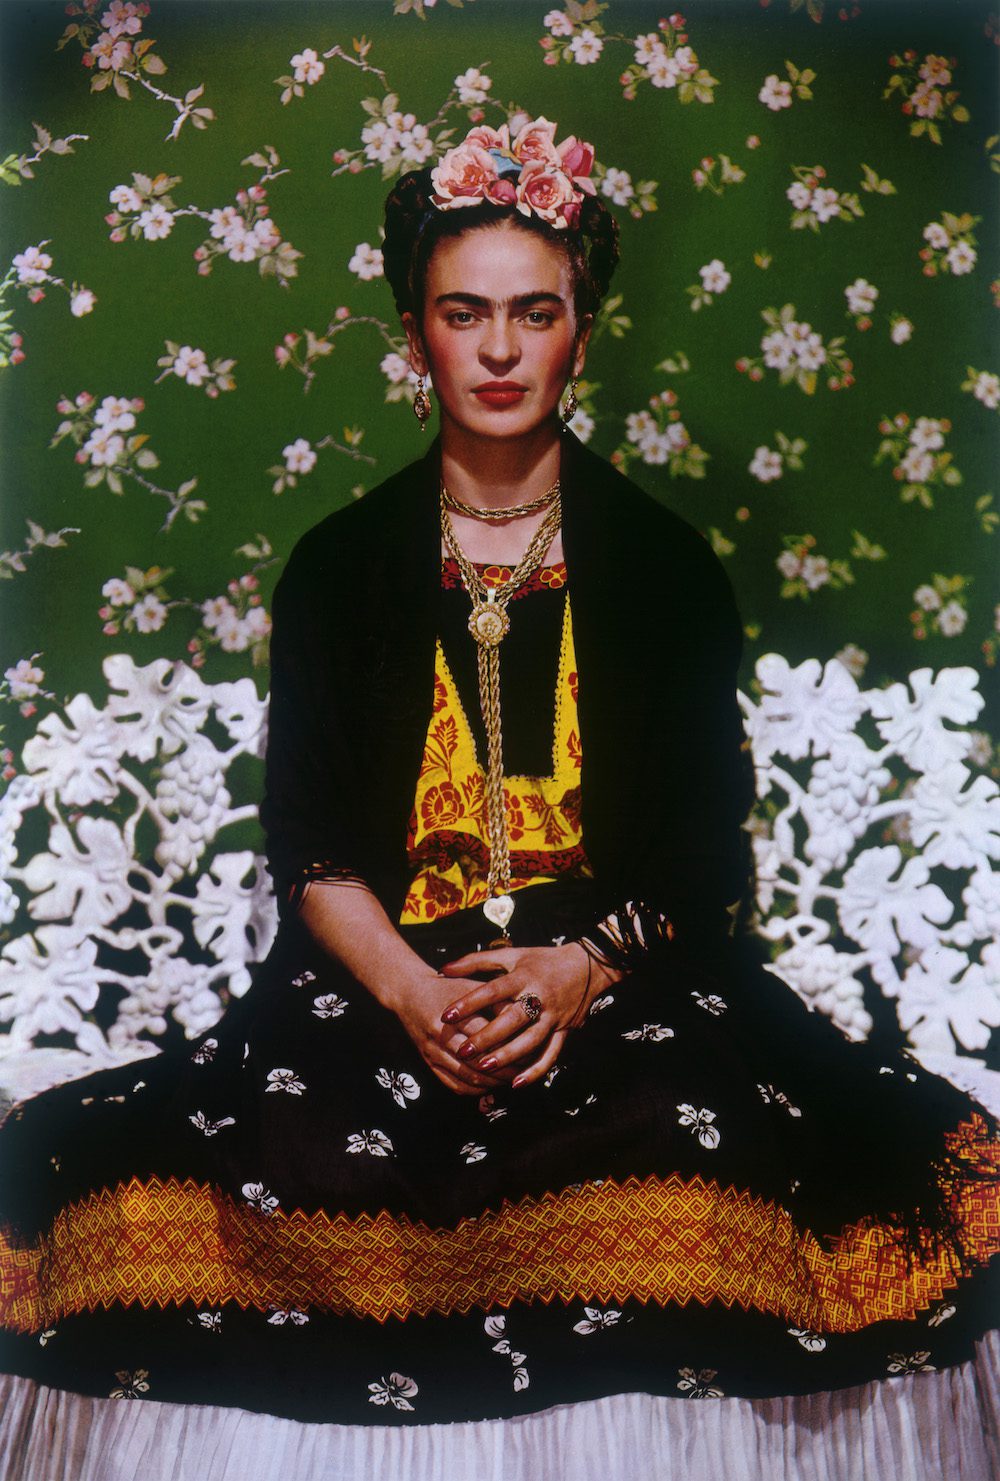 Nickolas Muray 'Frida Kahlo on
Bench #5' 1939. The Jacques and
Natasha Gelman Collection of 20th
Century Mexican Art and the Vergel Foundation. © Nickolas Muray Photo Archives